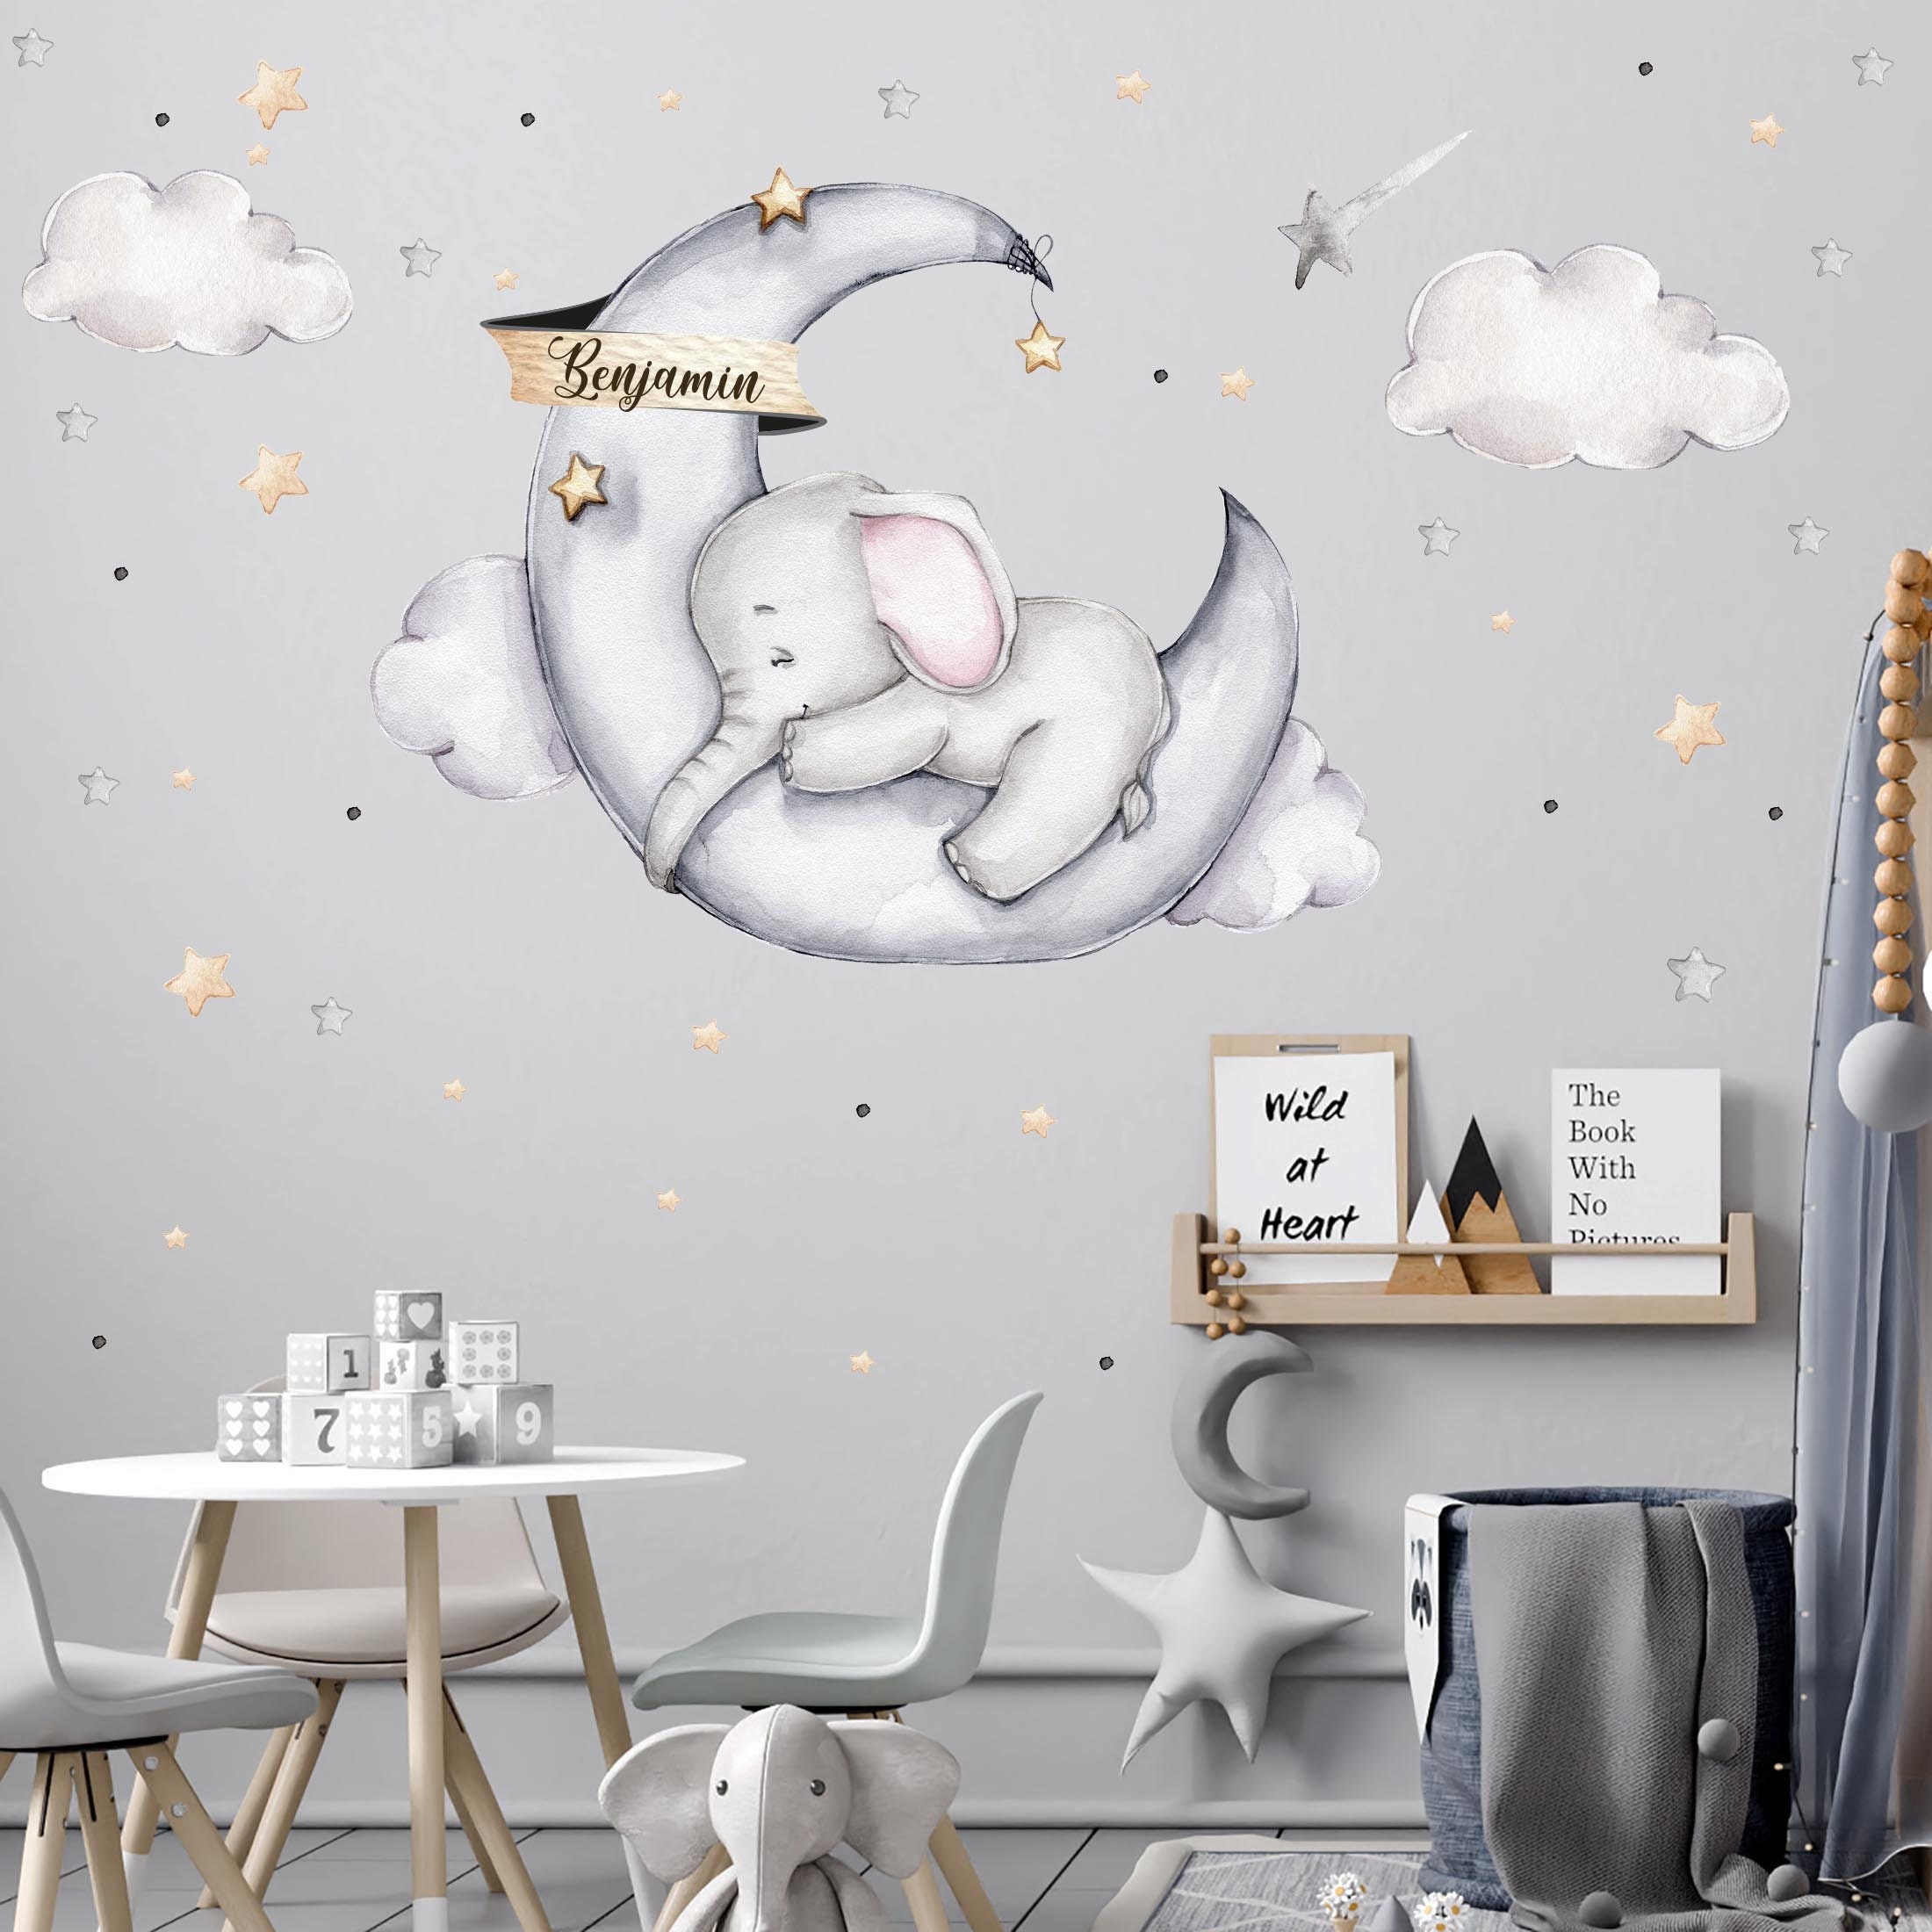 Elephant on the Moon V329 With WISH NAME Wall Decal Children\'s Room Wall  Sticker Sticker Sticker With Elephant Name Sticker Name - Etsy | Wandtattoos